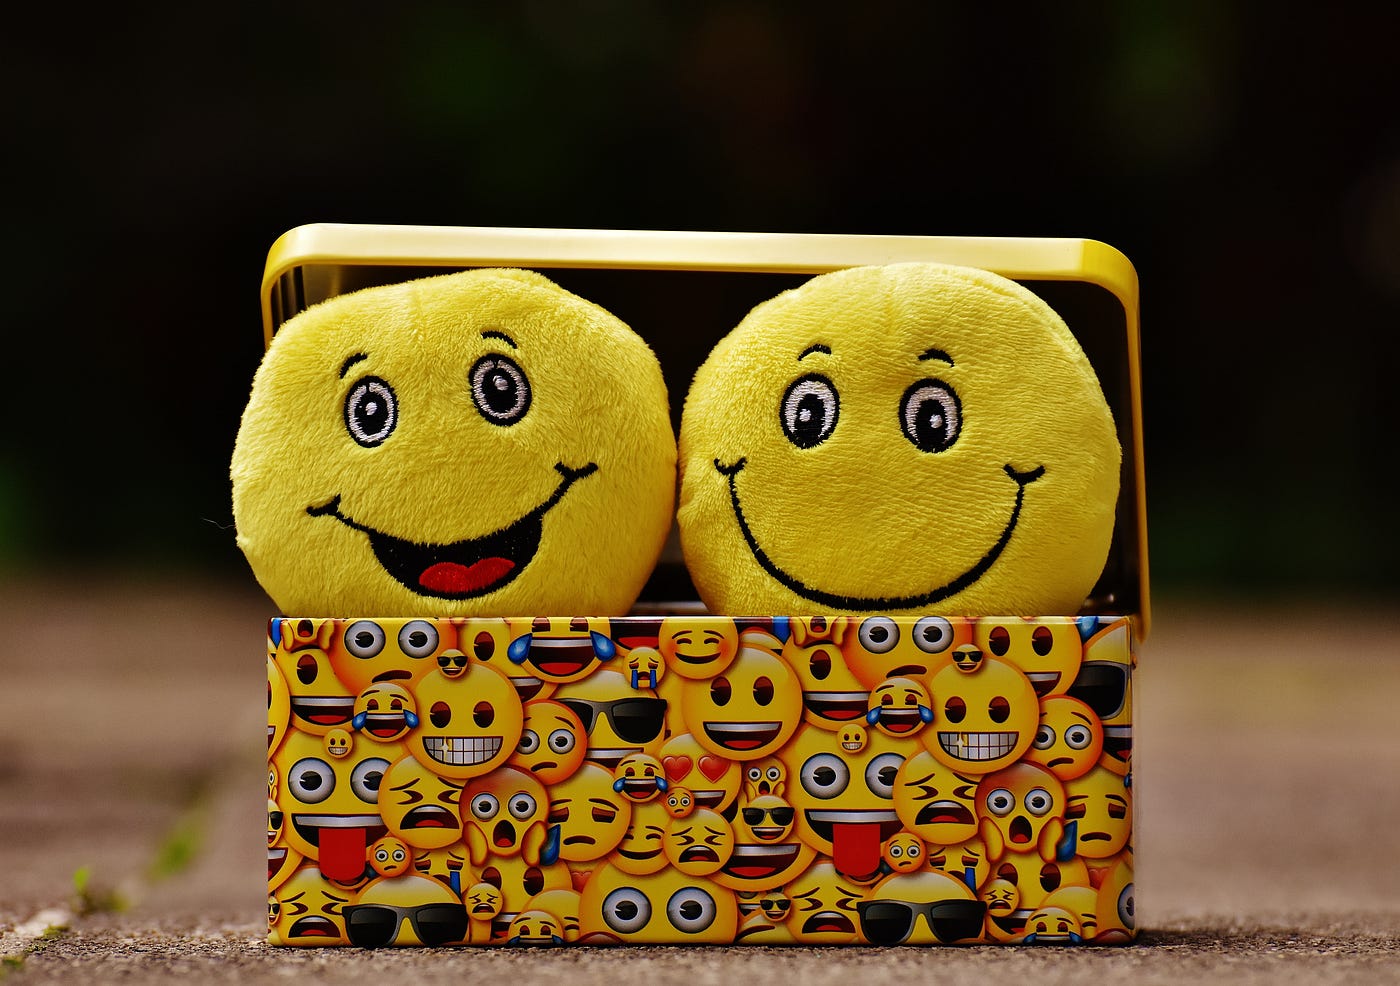 Two happy face pillows in a box